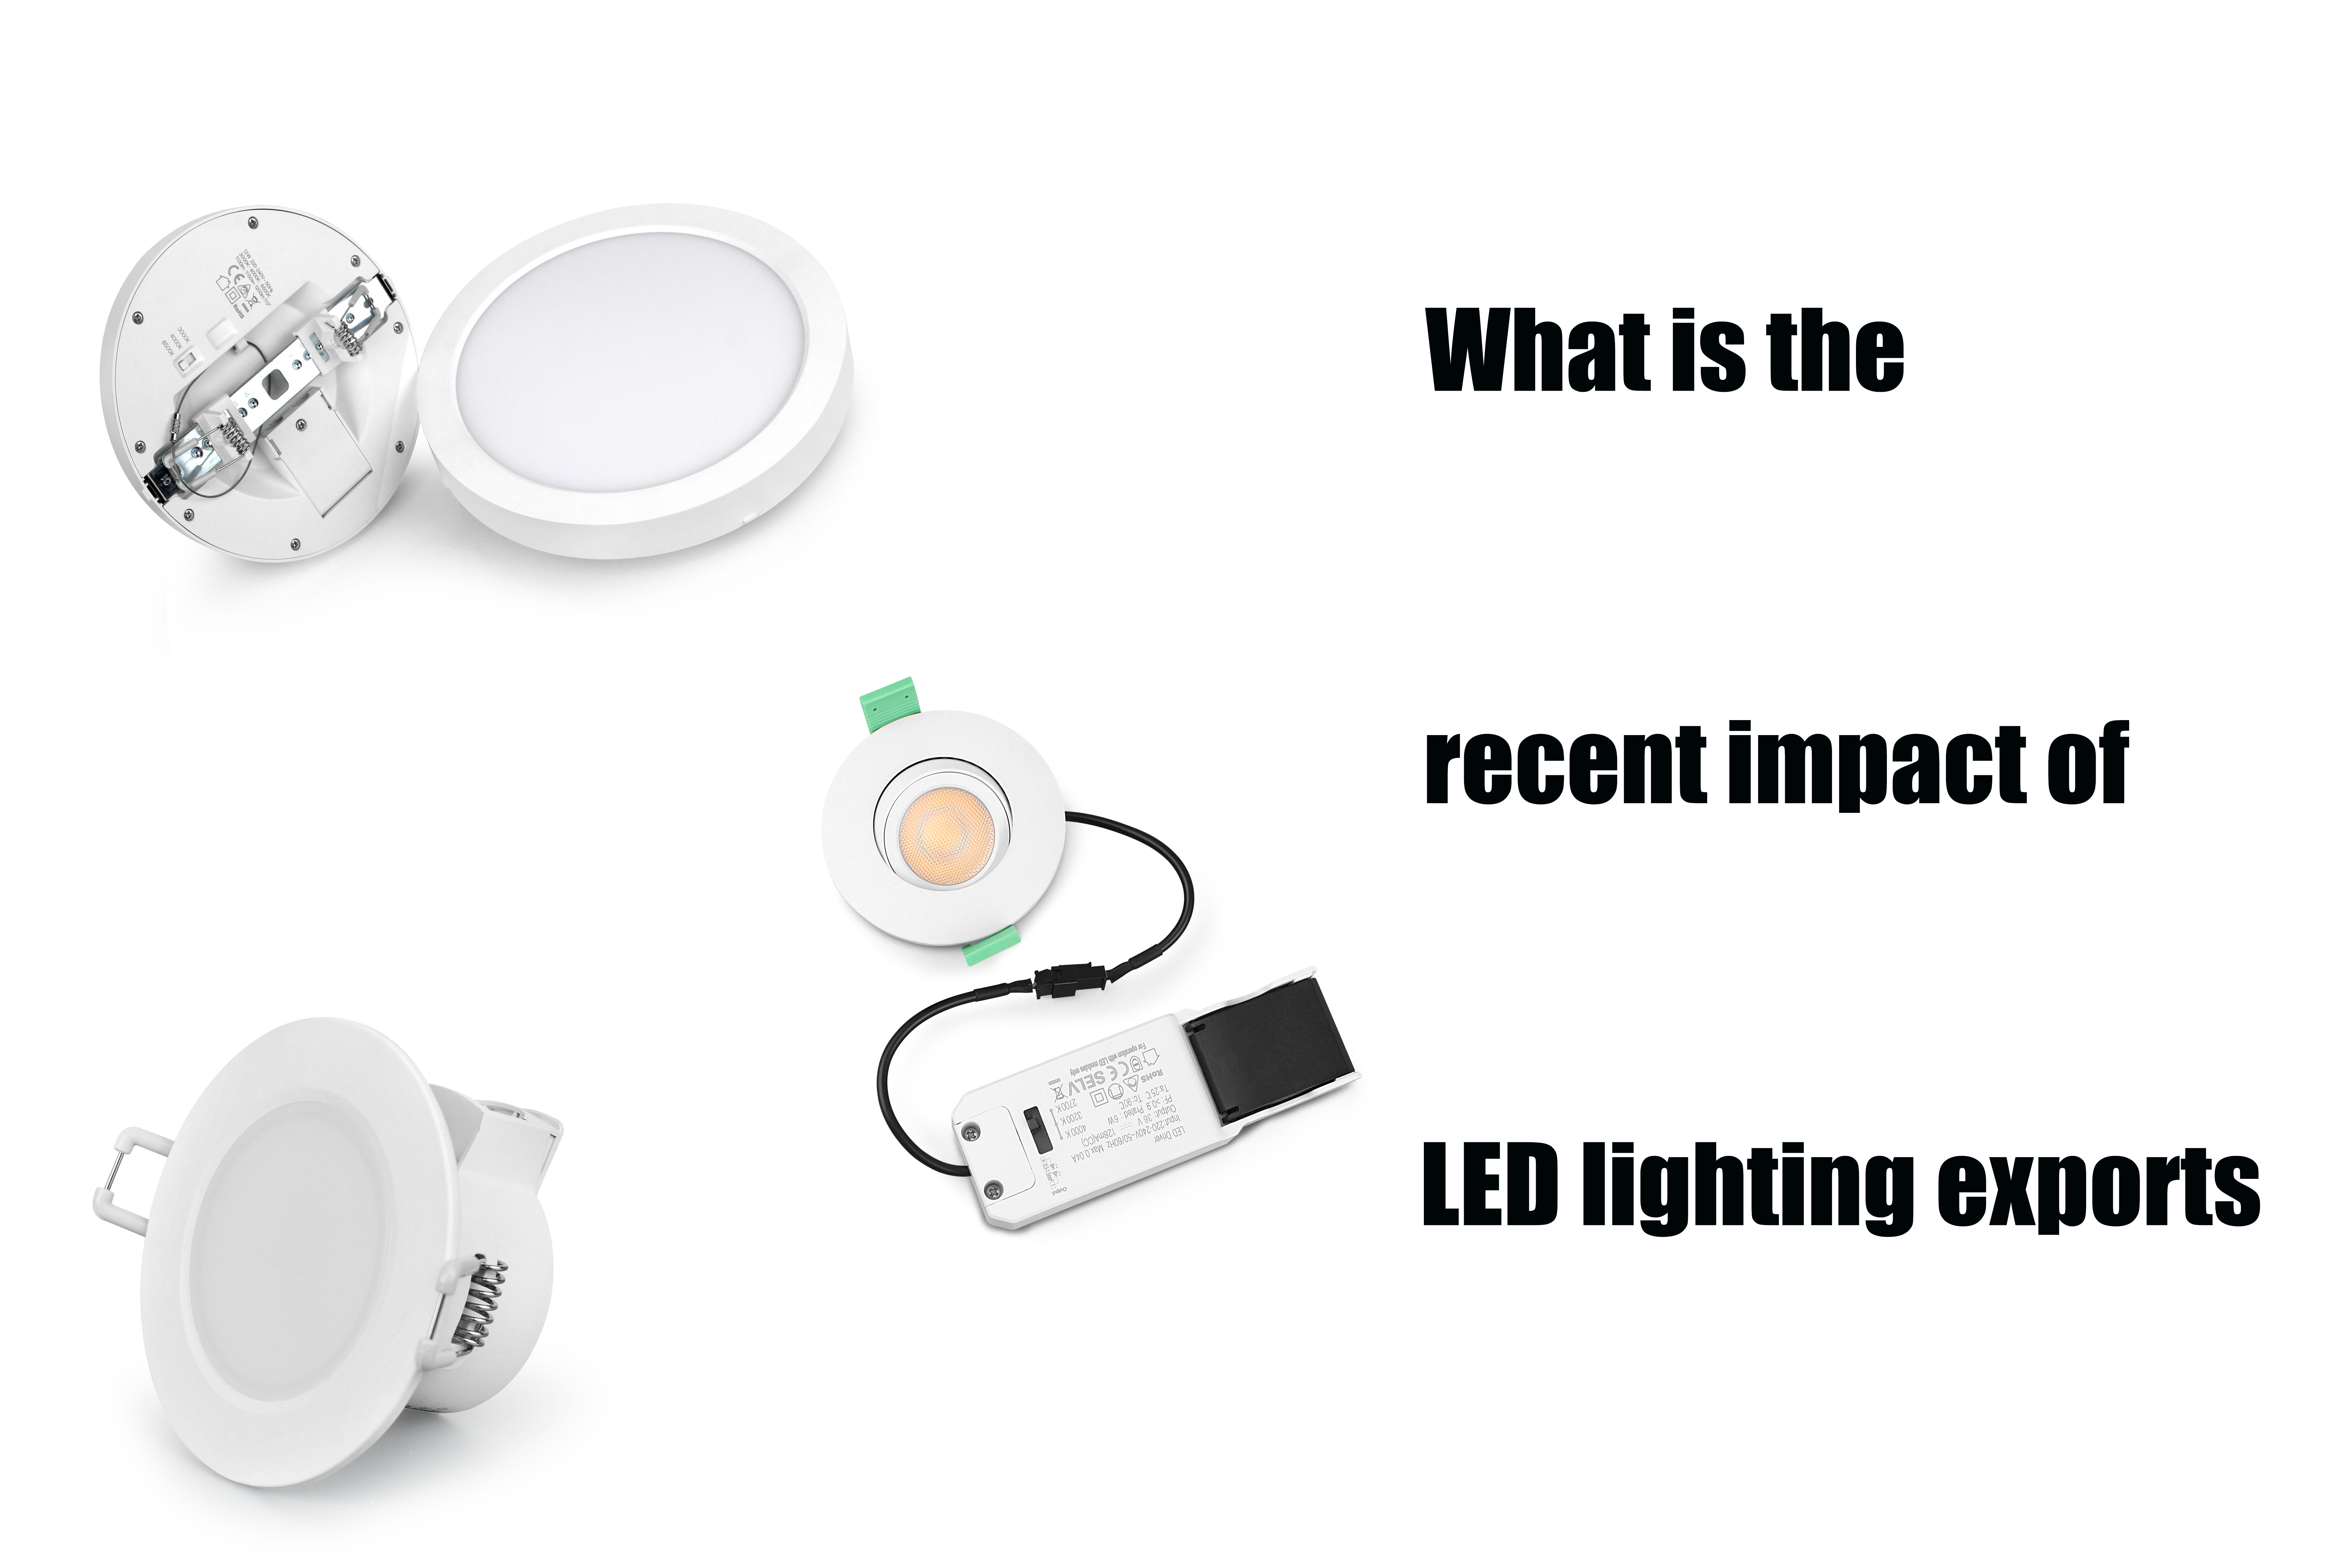 What is the recent impact of LED lighting exports?